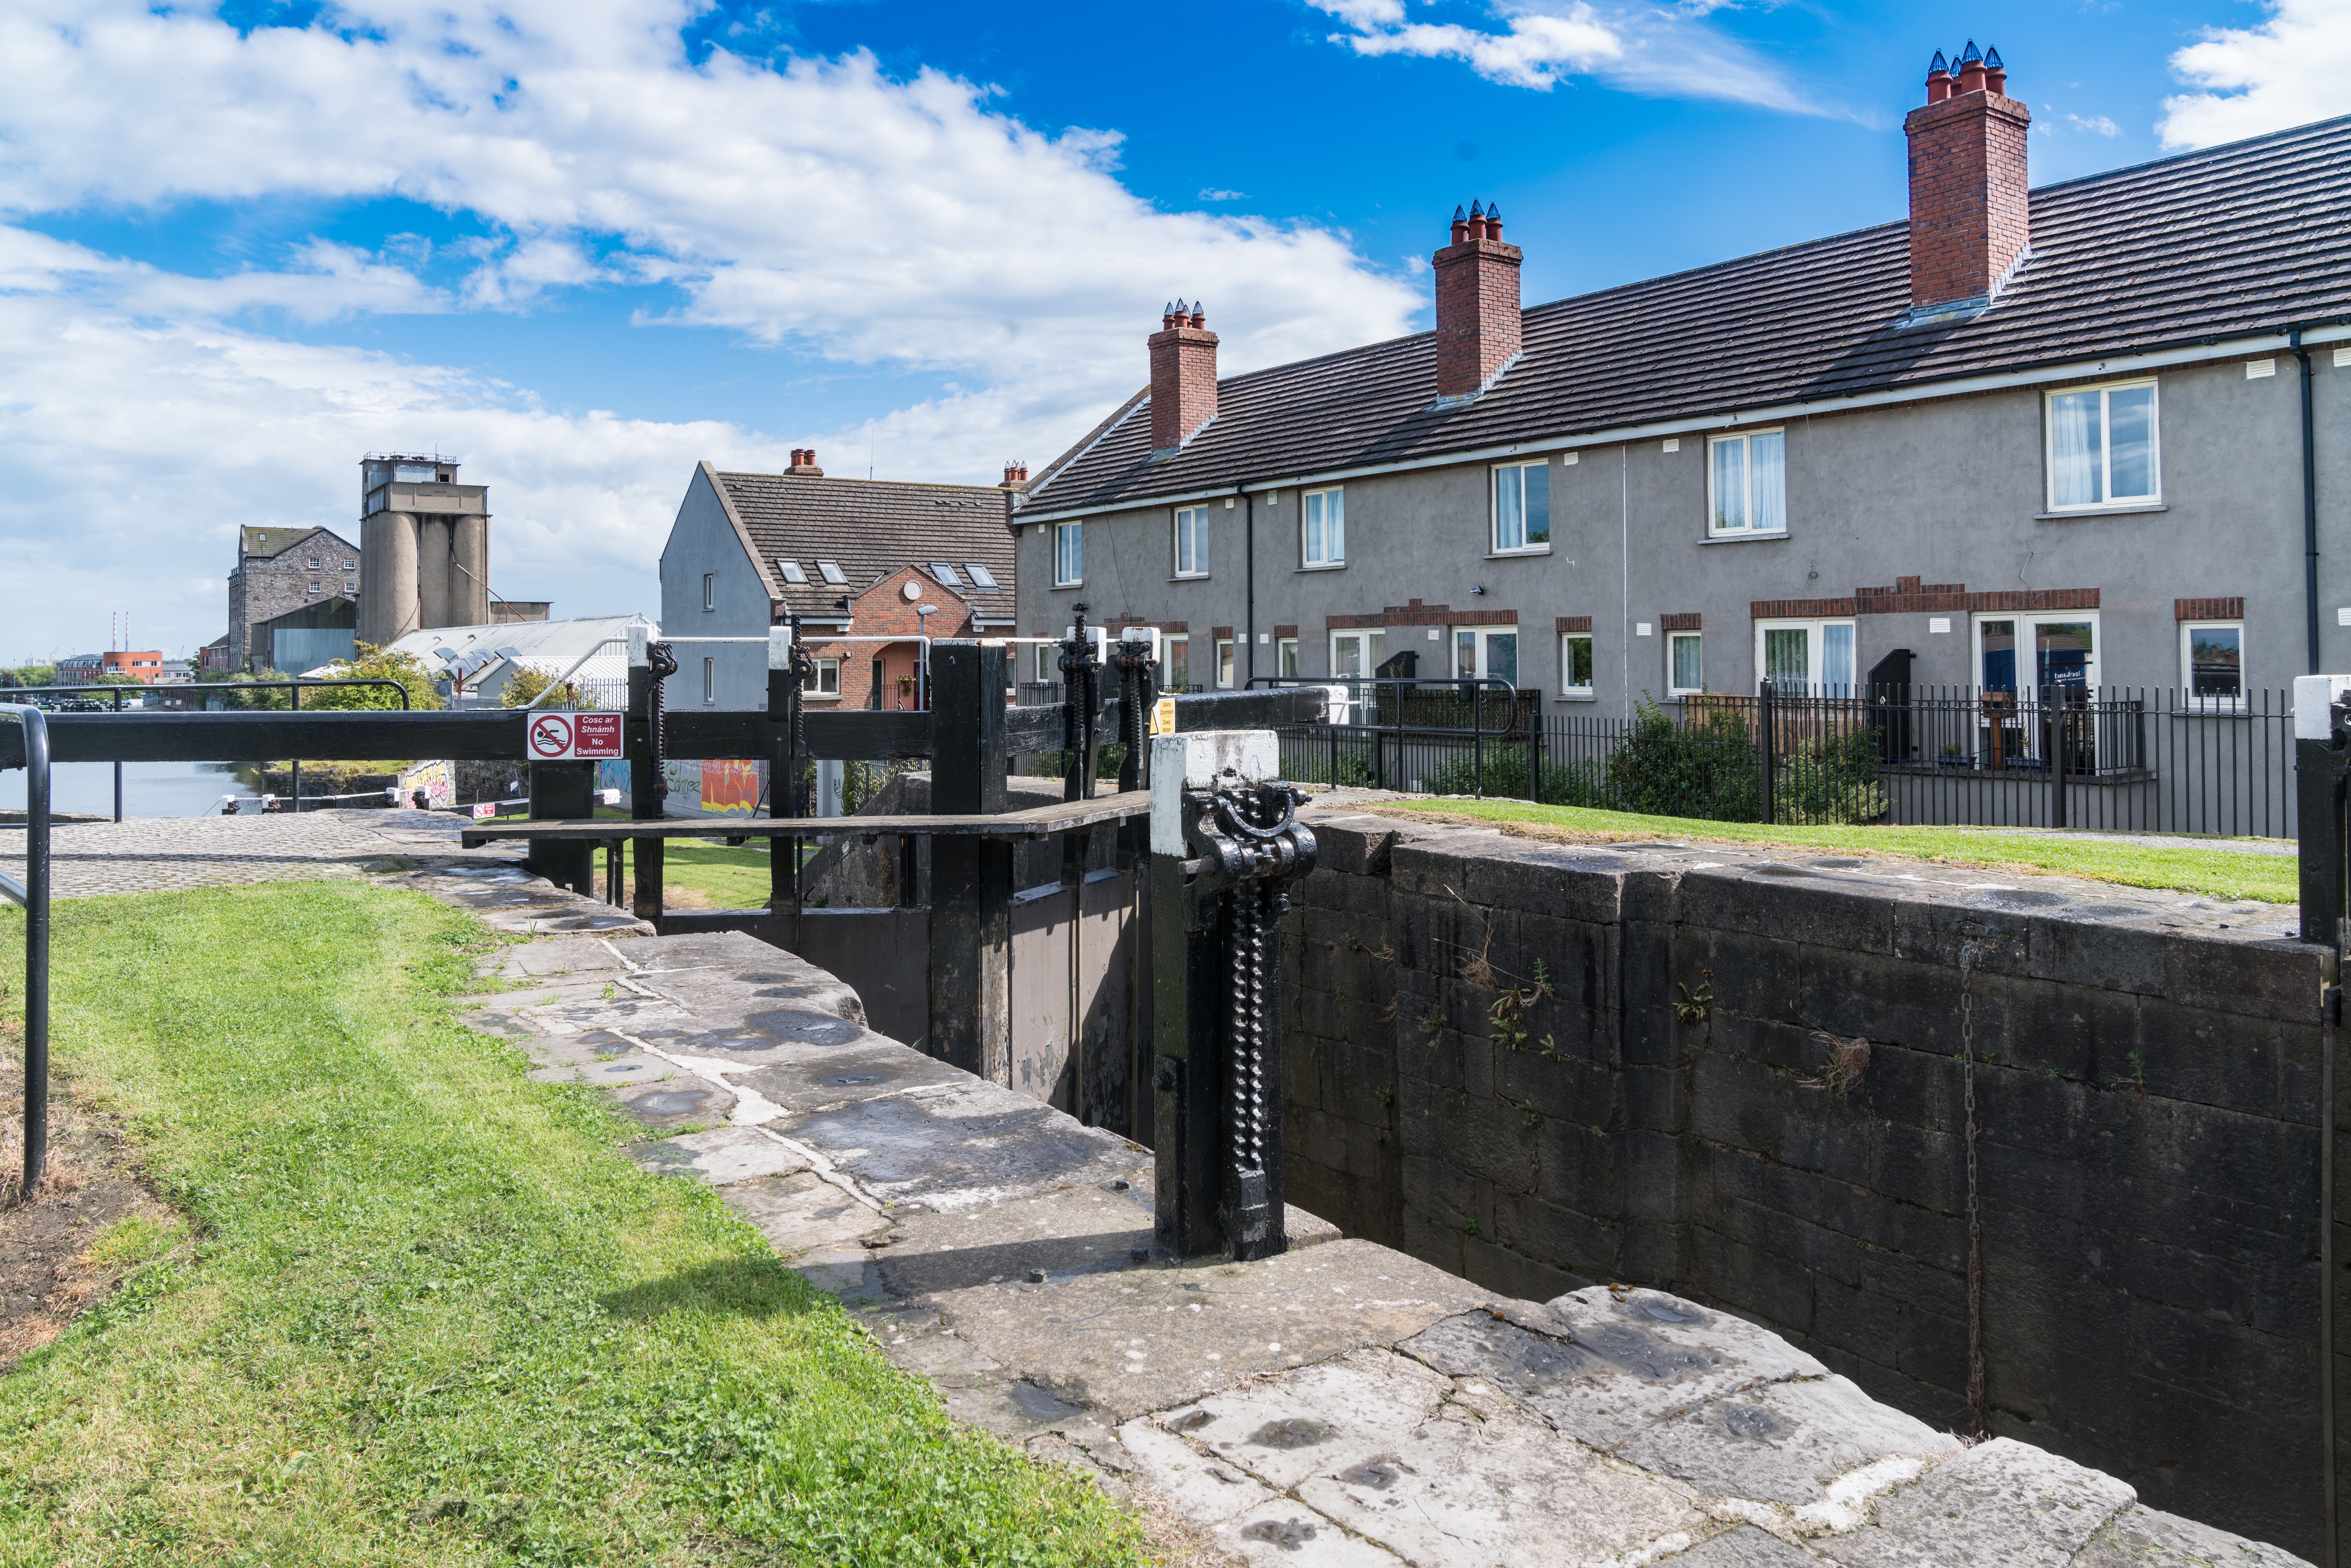  ROYAL CANAL - CABRA AREA 012 